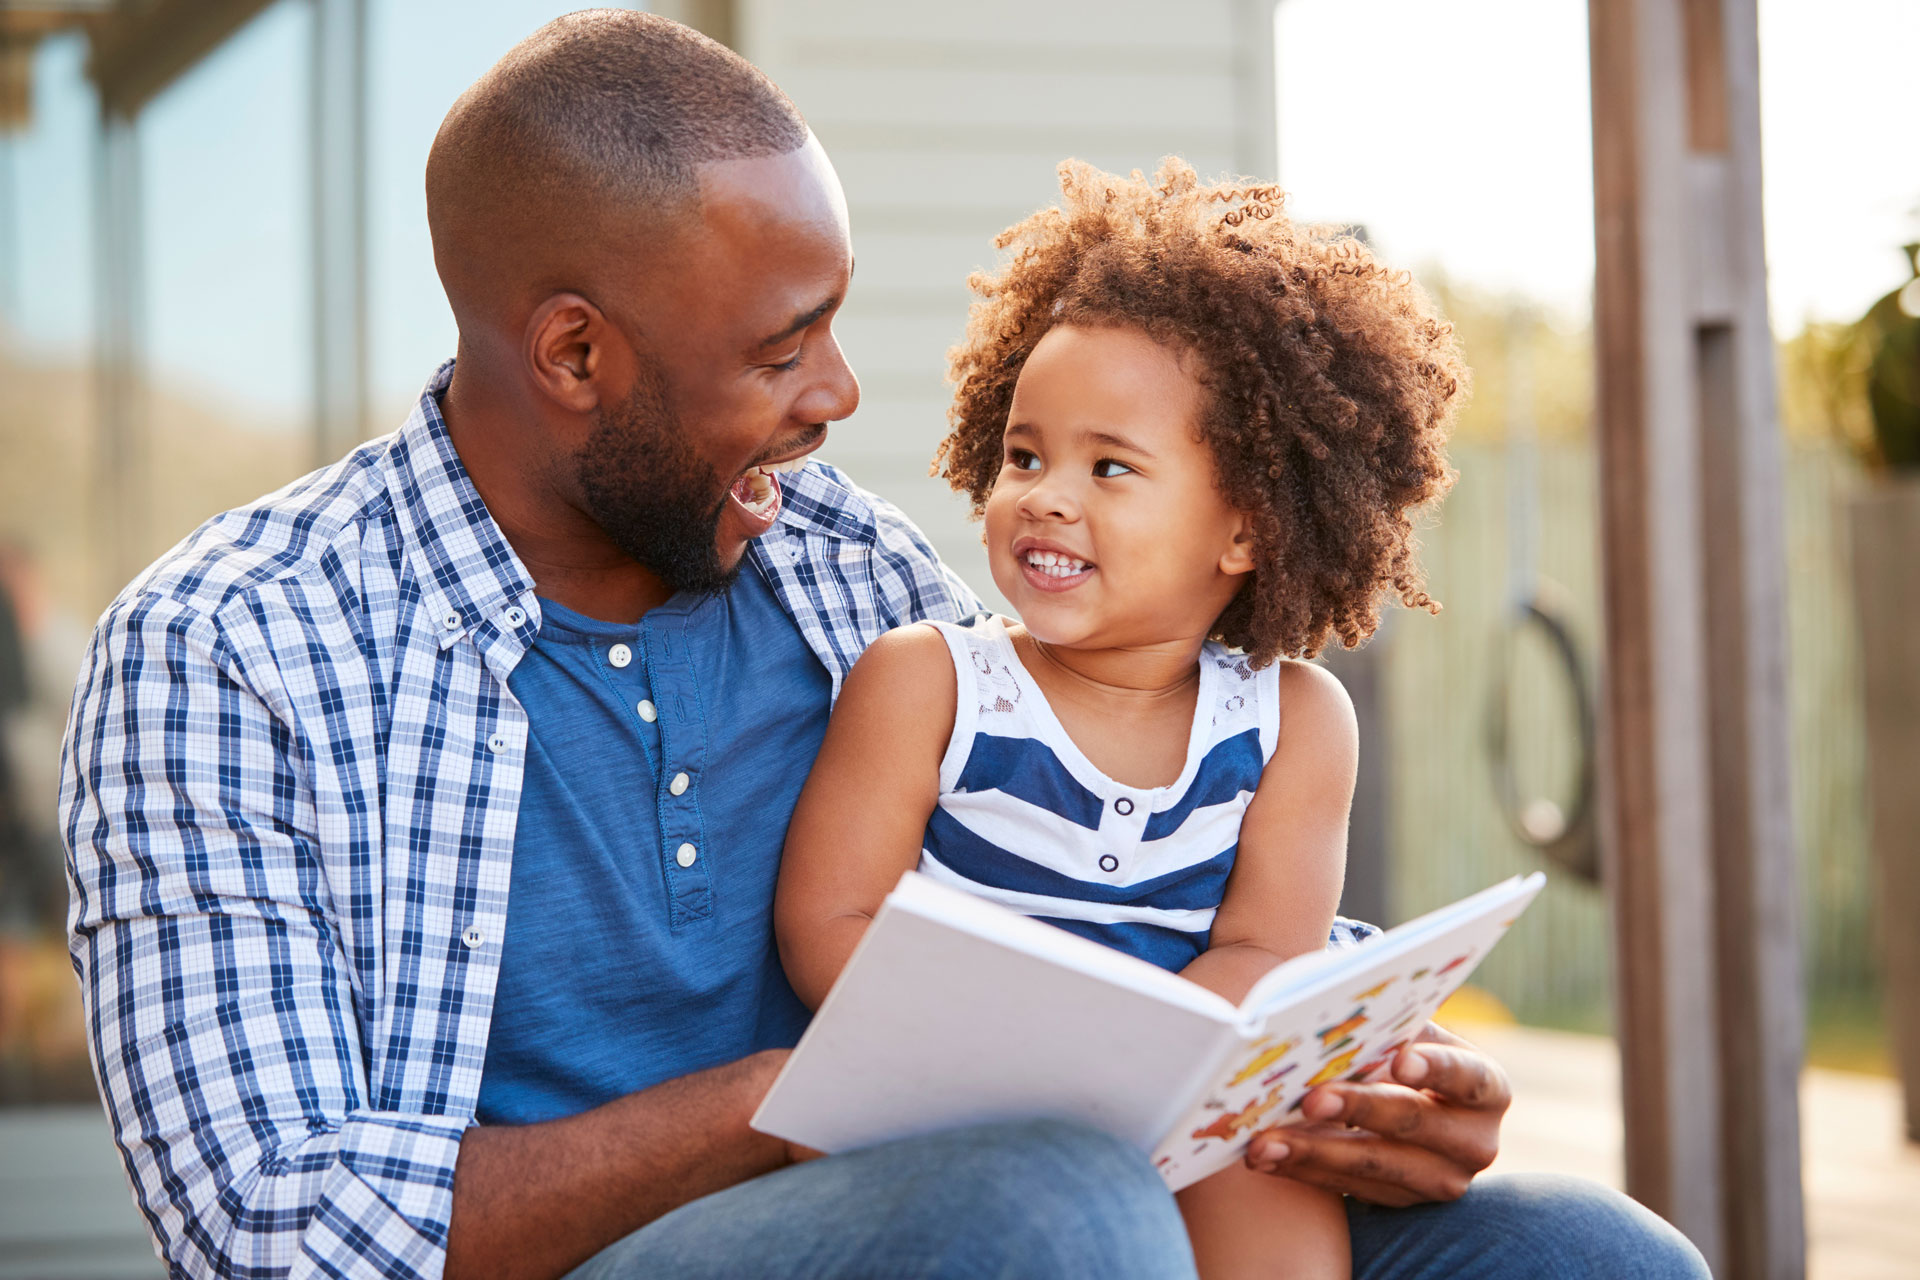 Young black father and daughter reading book outside